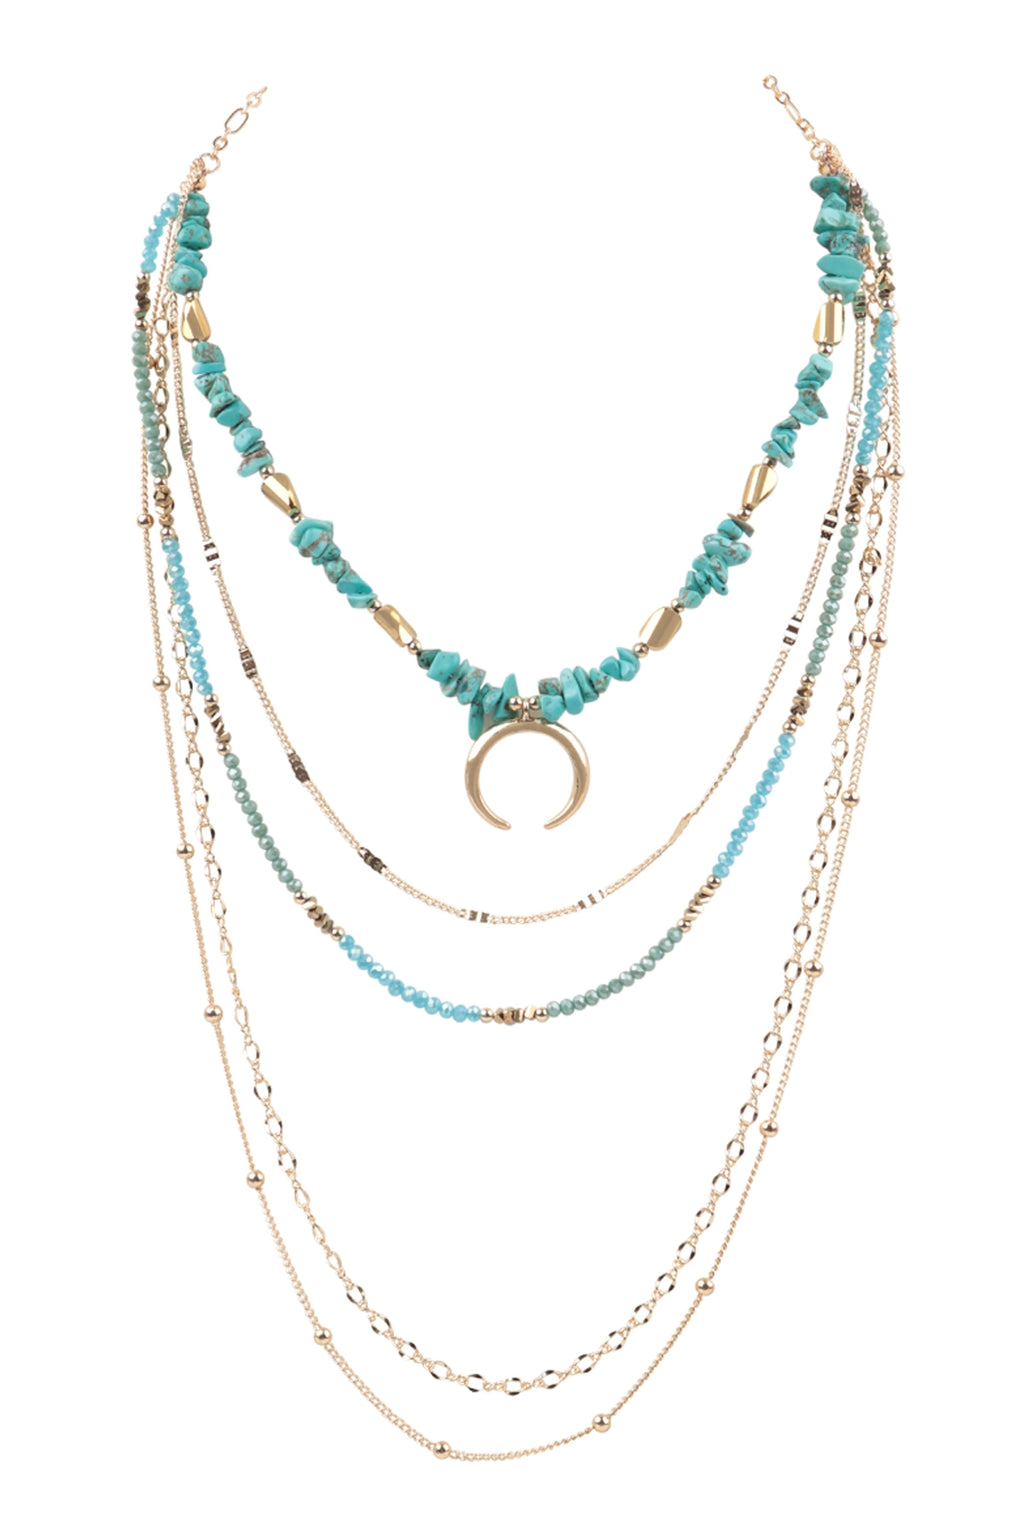 Layered Chain, Natural Stone Chip Mix Beads Crescent Pendant Necklace Turquoise - Pack of 6